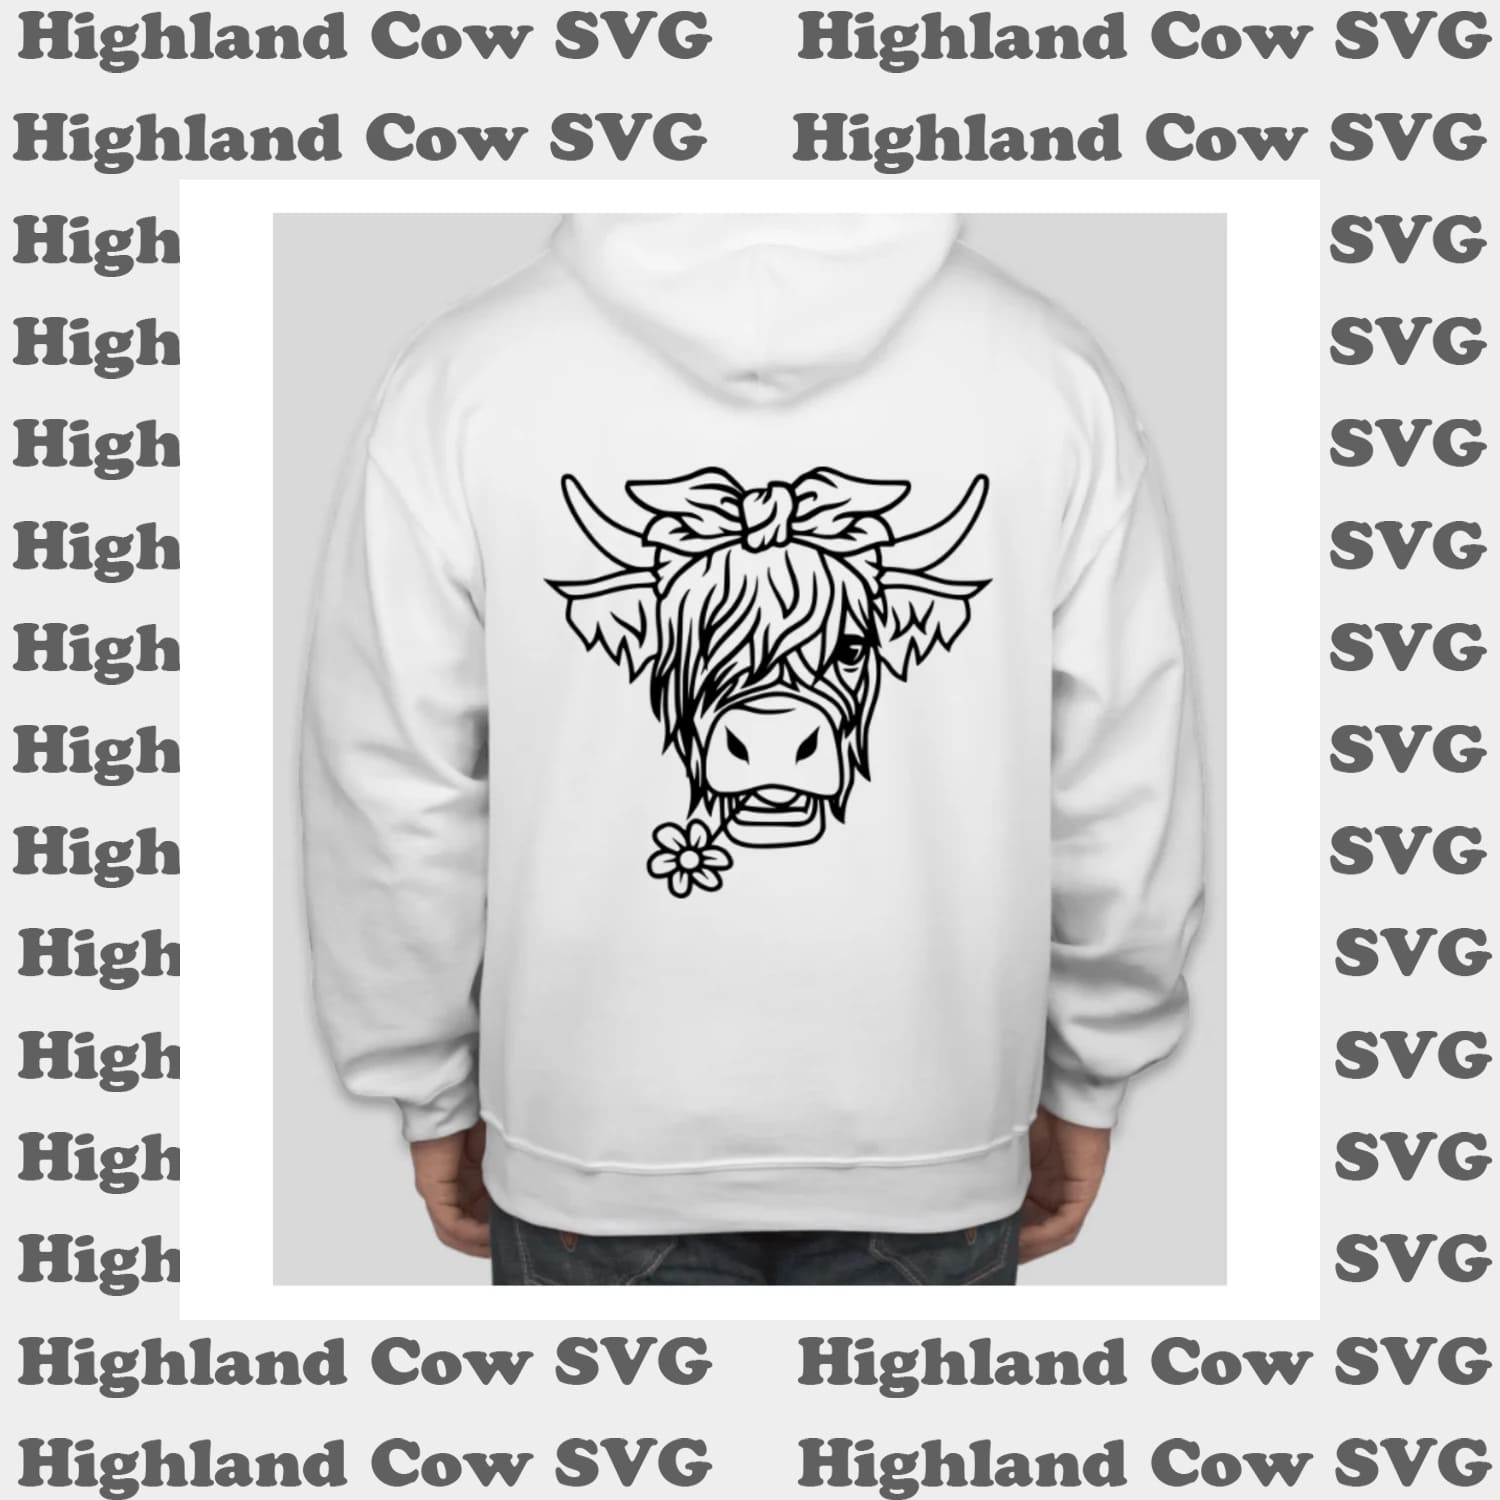 White hoodie with a black and white image of a cow.